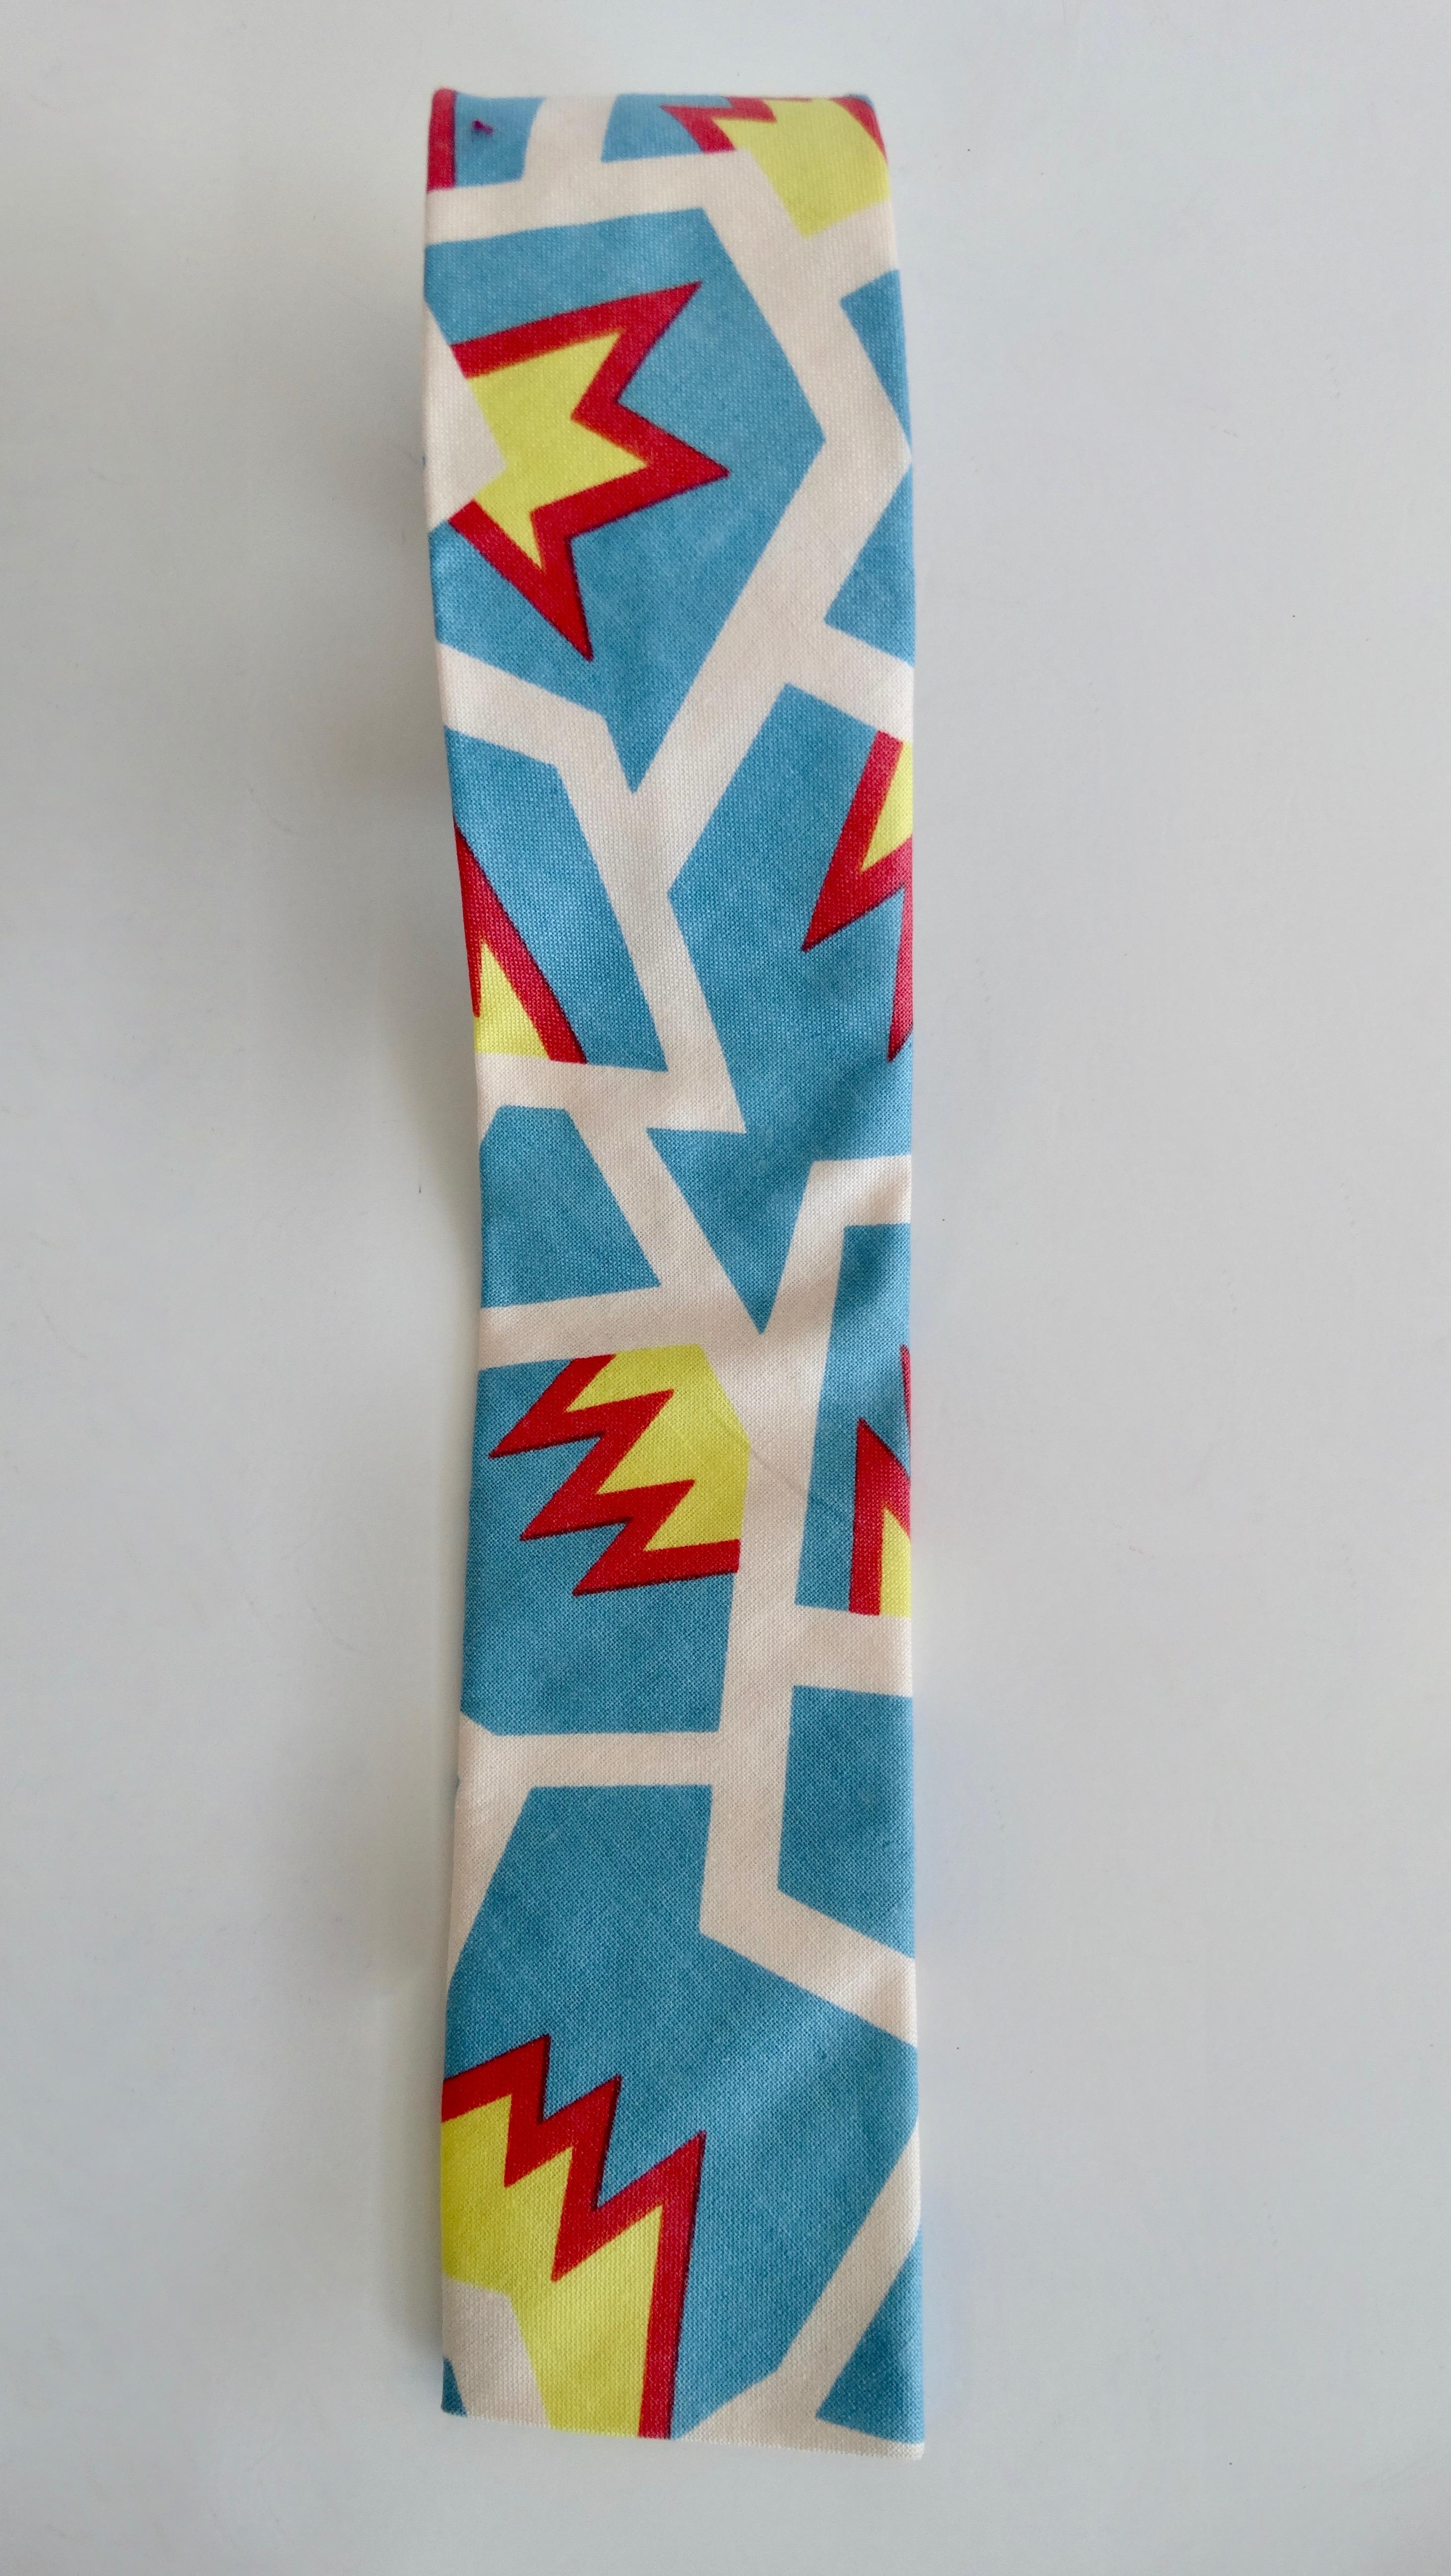 Elevate your look with this amazing Memphis Milano tie! Circa 1981, this skinny square Cotton tie features an abstract design created by Memphis Milano founding member, Nathalie Du Pasquier. Comprised of multi-directional white lines with red/yellow